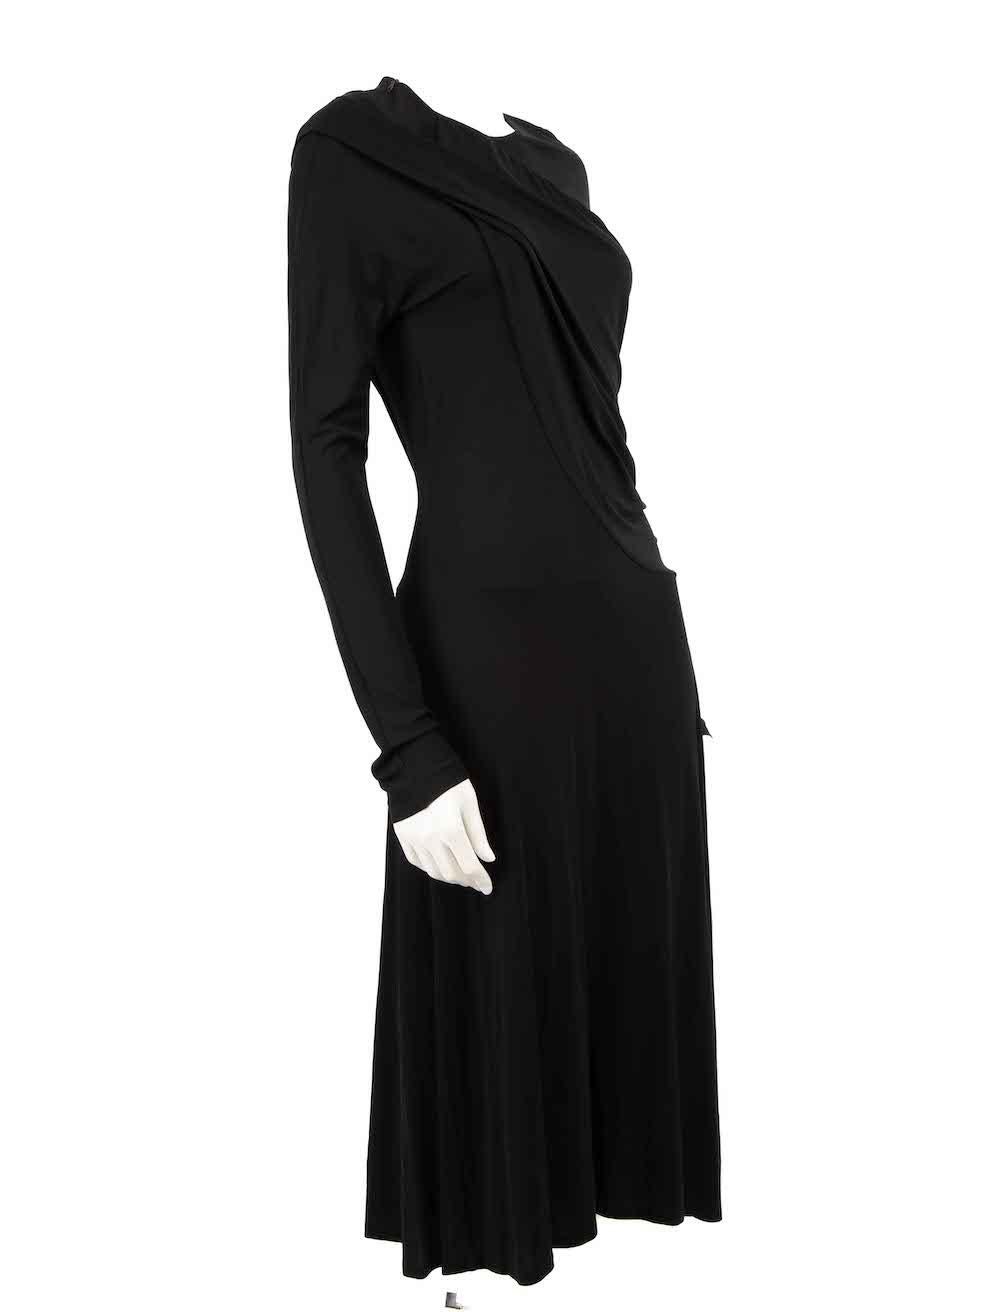 CONDITION is Very good. Hardly any visible wear to dress is evident on this used Jil Sander designer resale item.
 
 
 
 Details
 
 
 Black
 
 Viscose
 
 Dress
 
 Long sleeves
 
 Midi
 
 Round neck
 
 Neck zip fastening
 
 
 
 
 
 Made in Italy
 
 
